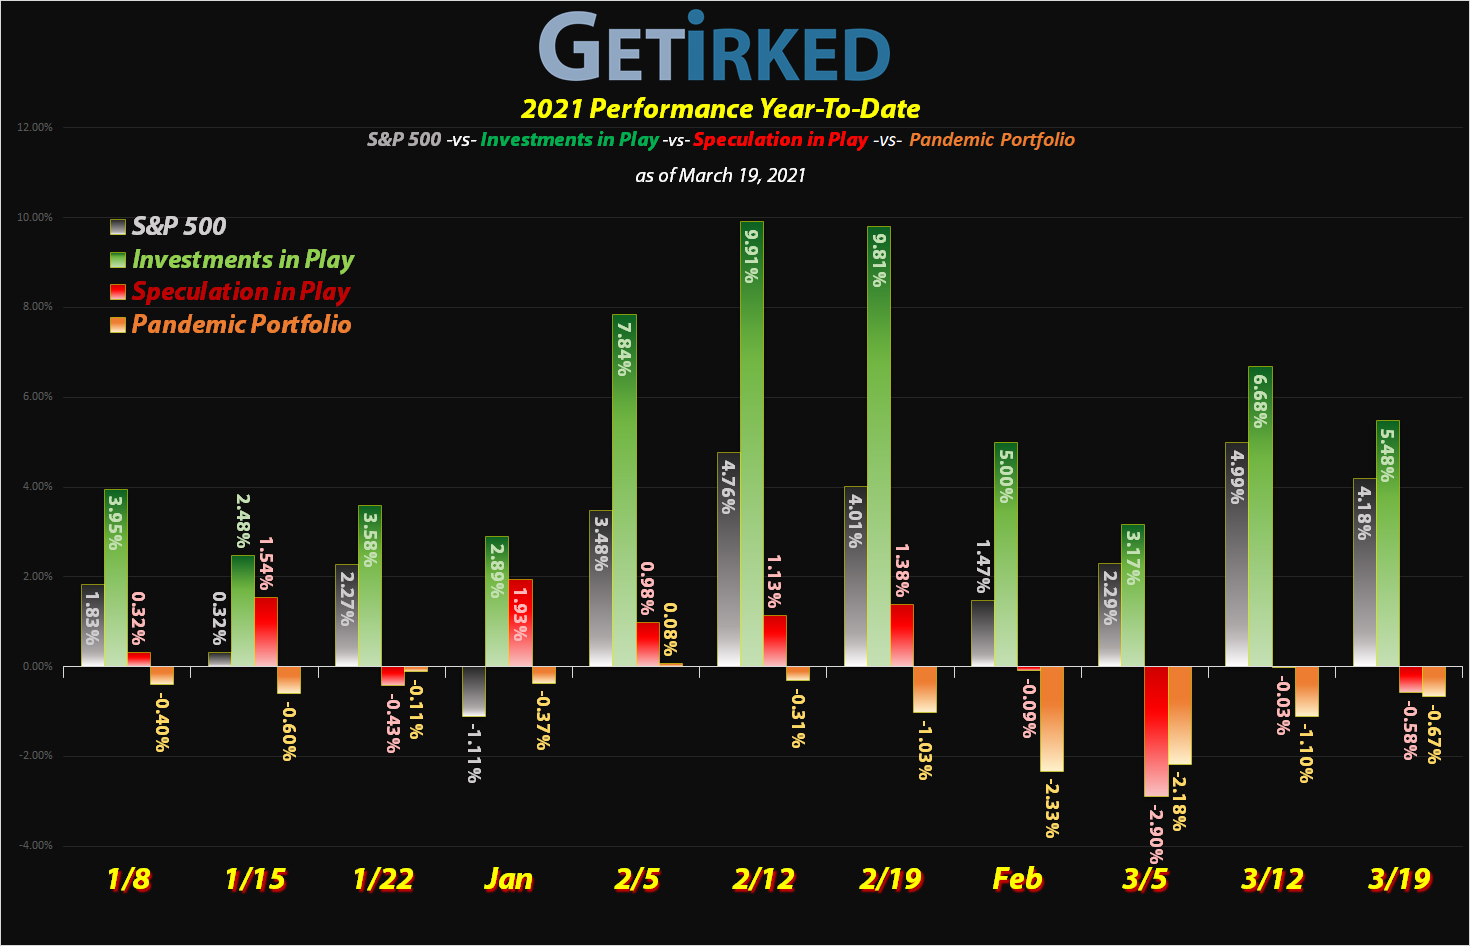 Get Irked - Year-to-Date Performance - Investments in Play vs. Speculation in Play - 2020 Year-to-Date Performance